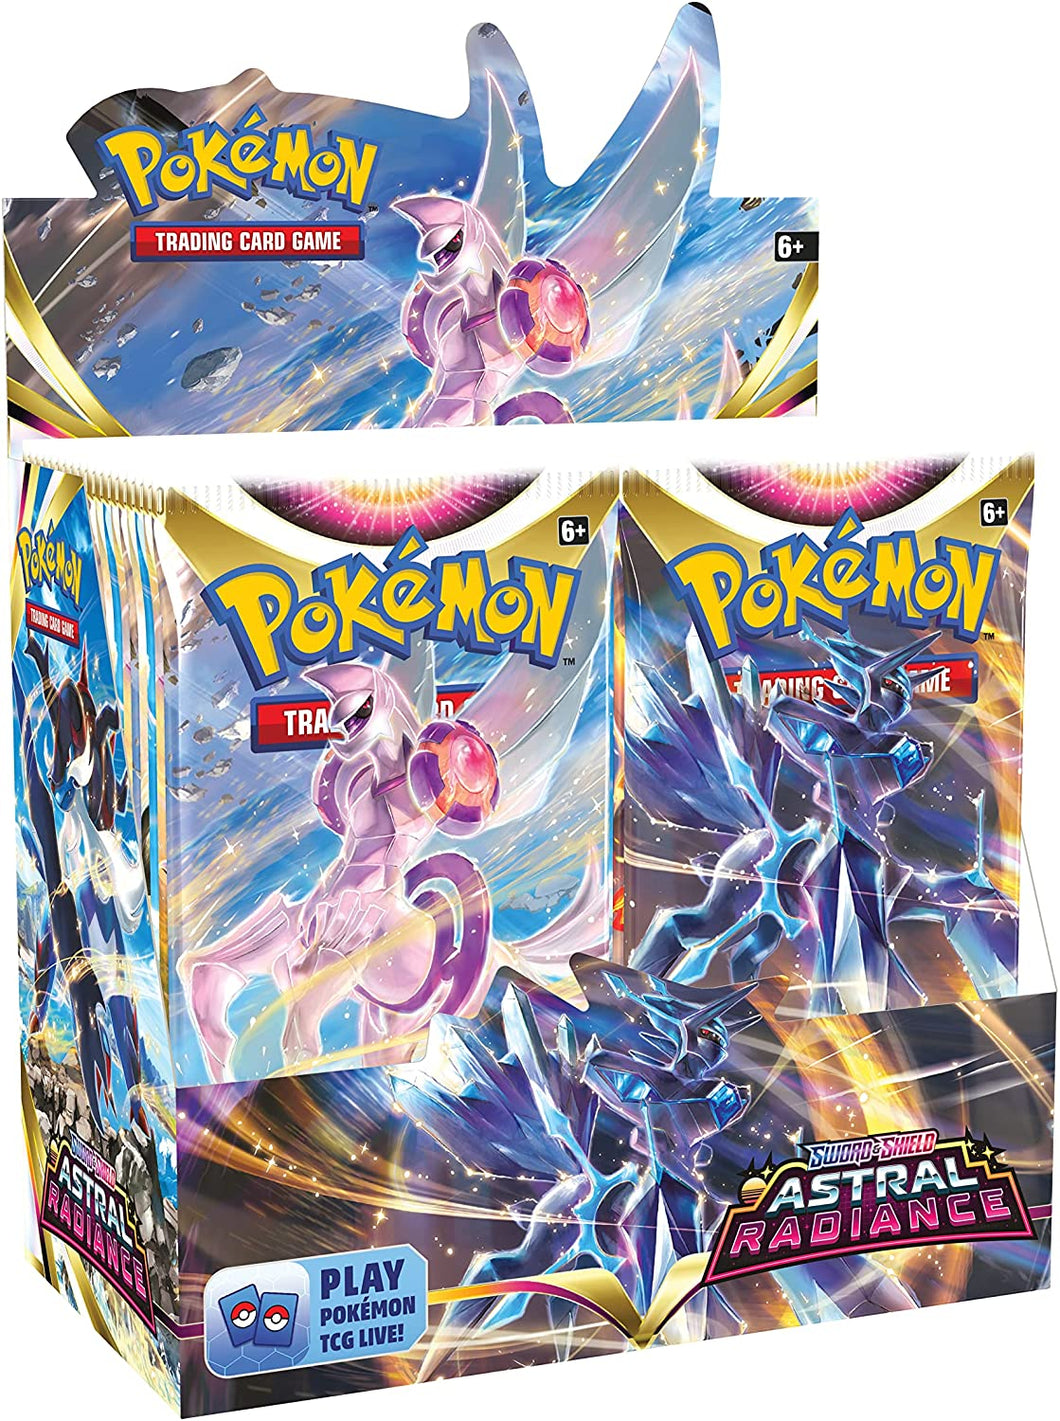 Pokemon Astral Radiance Booster Box (36 packs per box, 10 cards per pack)